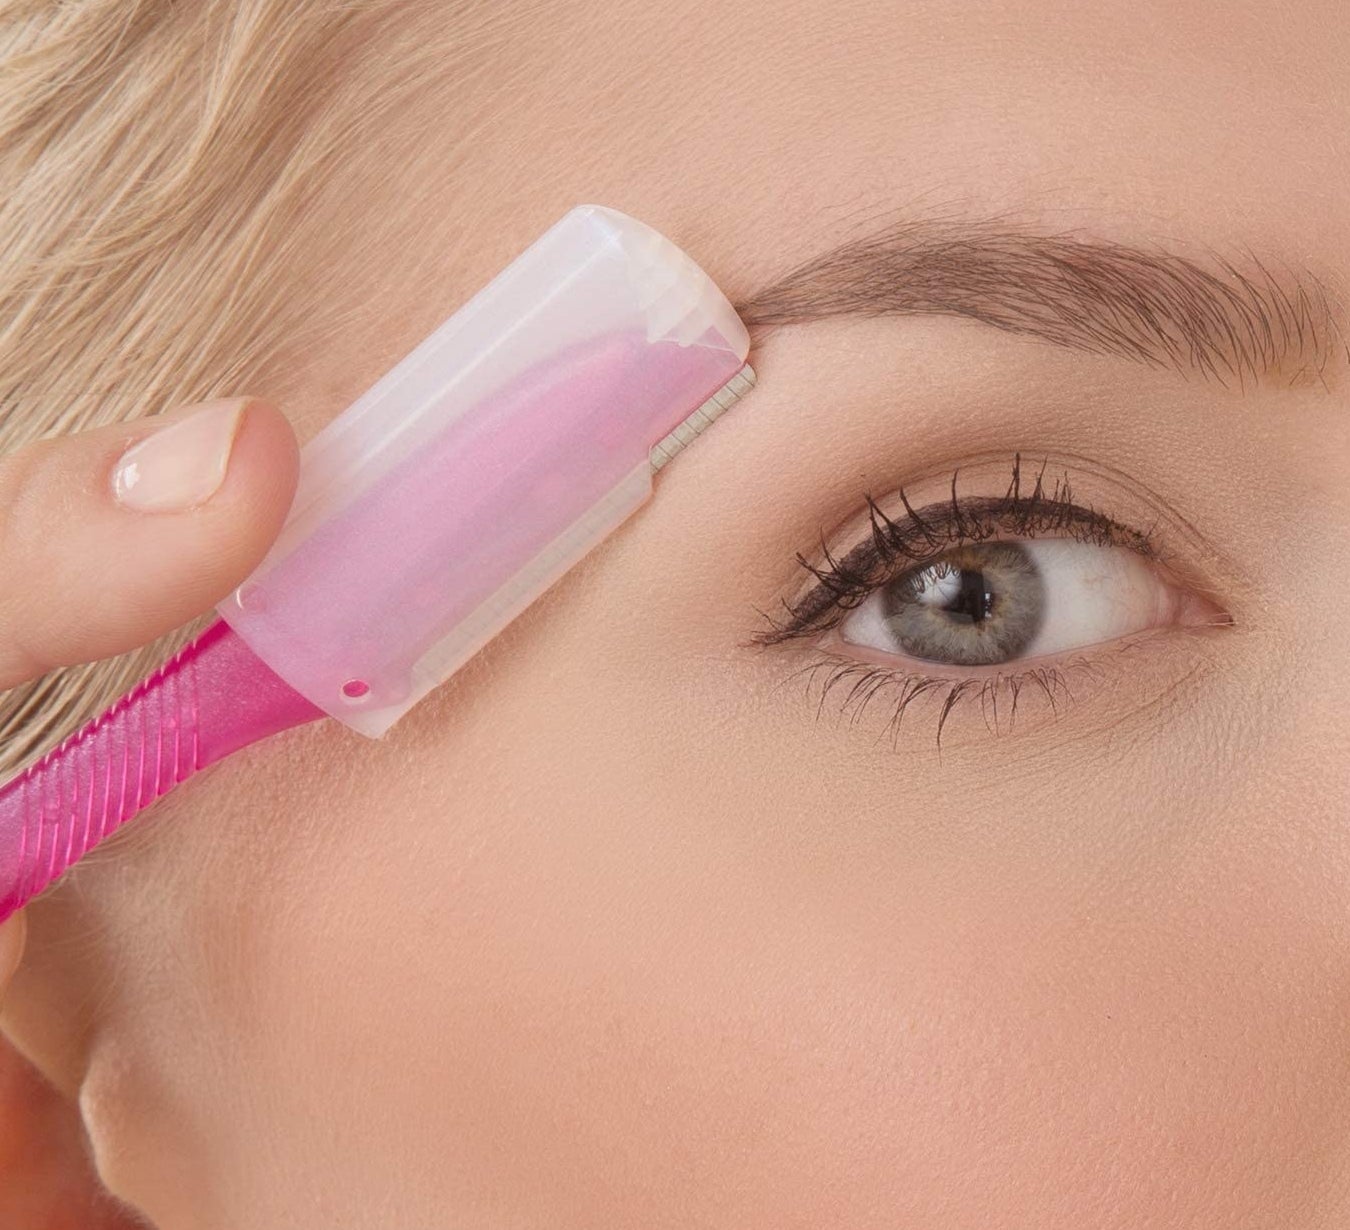 Closeup of someone using a shaver with the precision eyebrow shaping cap on